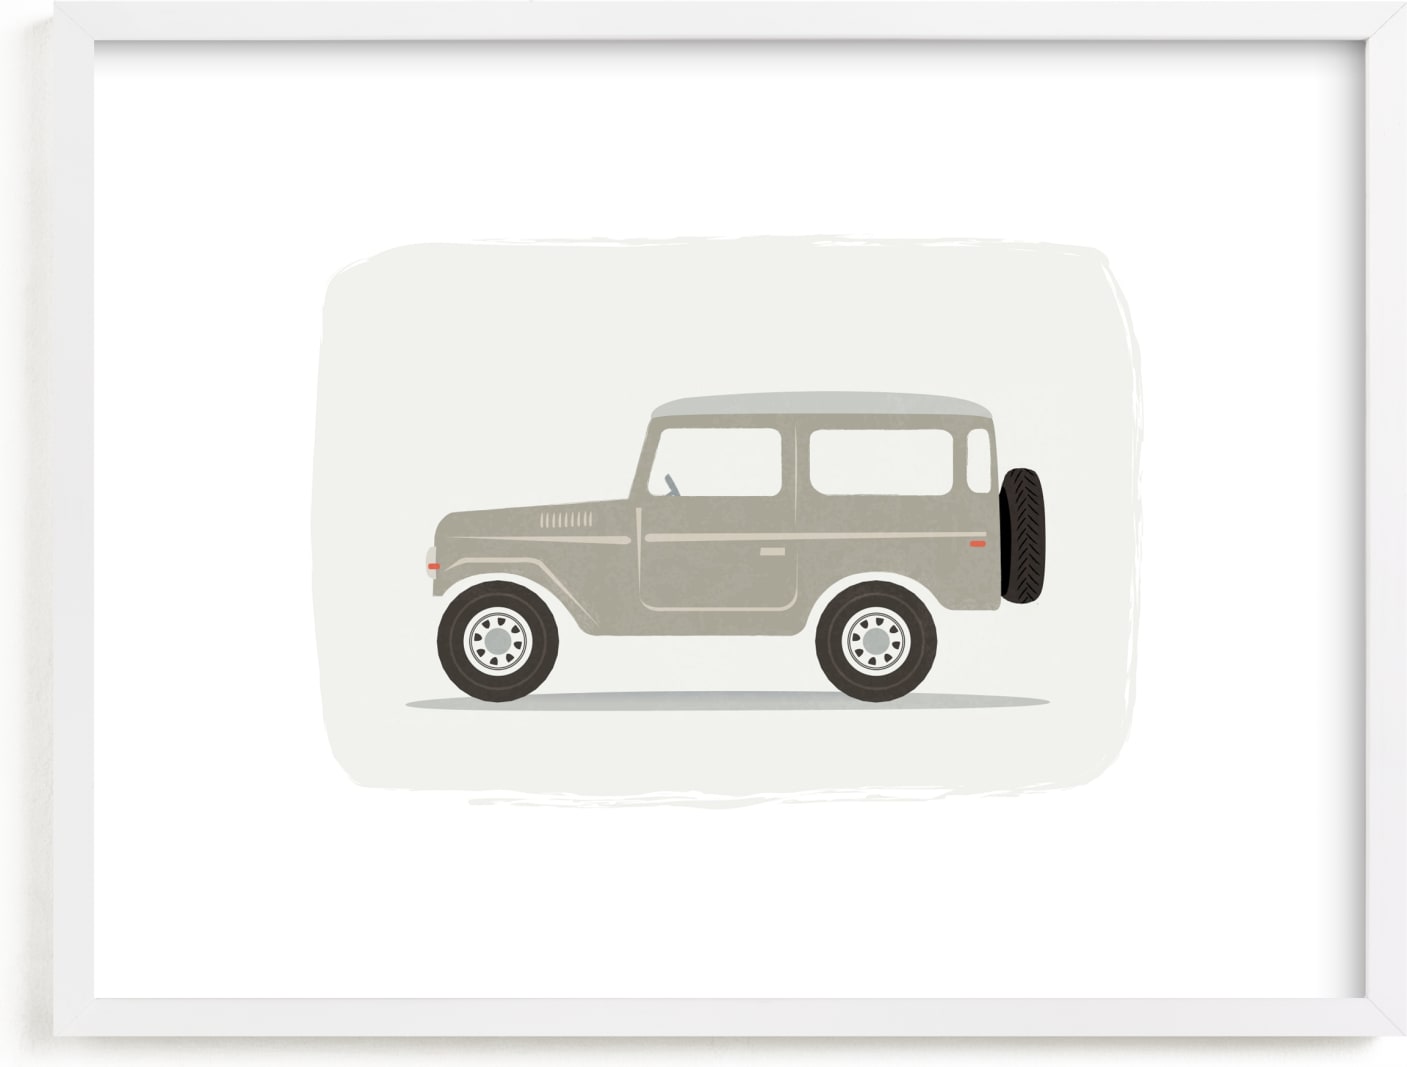 This is a white, grey, black art by Karidy Walker called Vintage Land Cruiser.